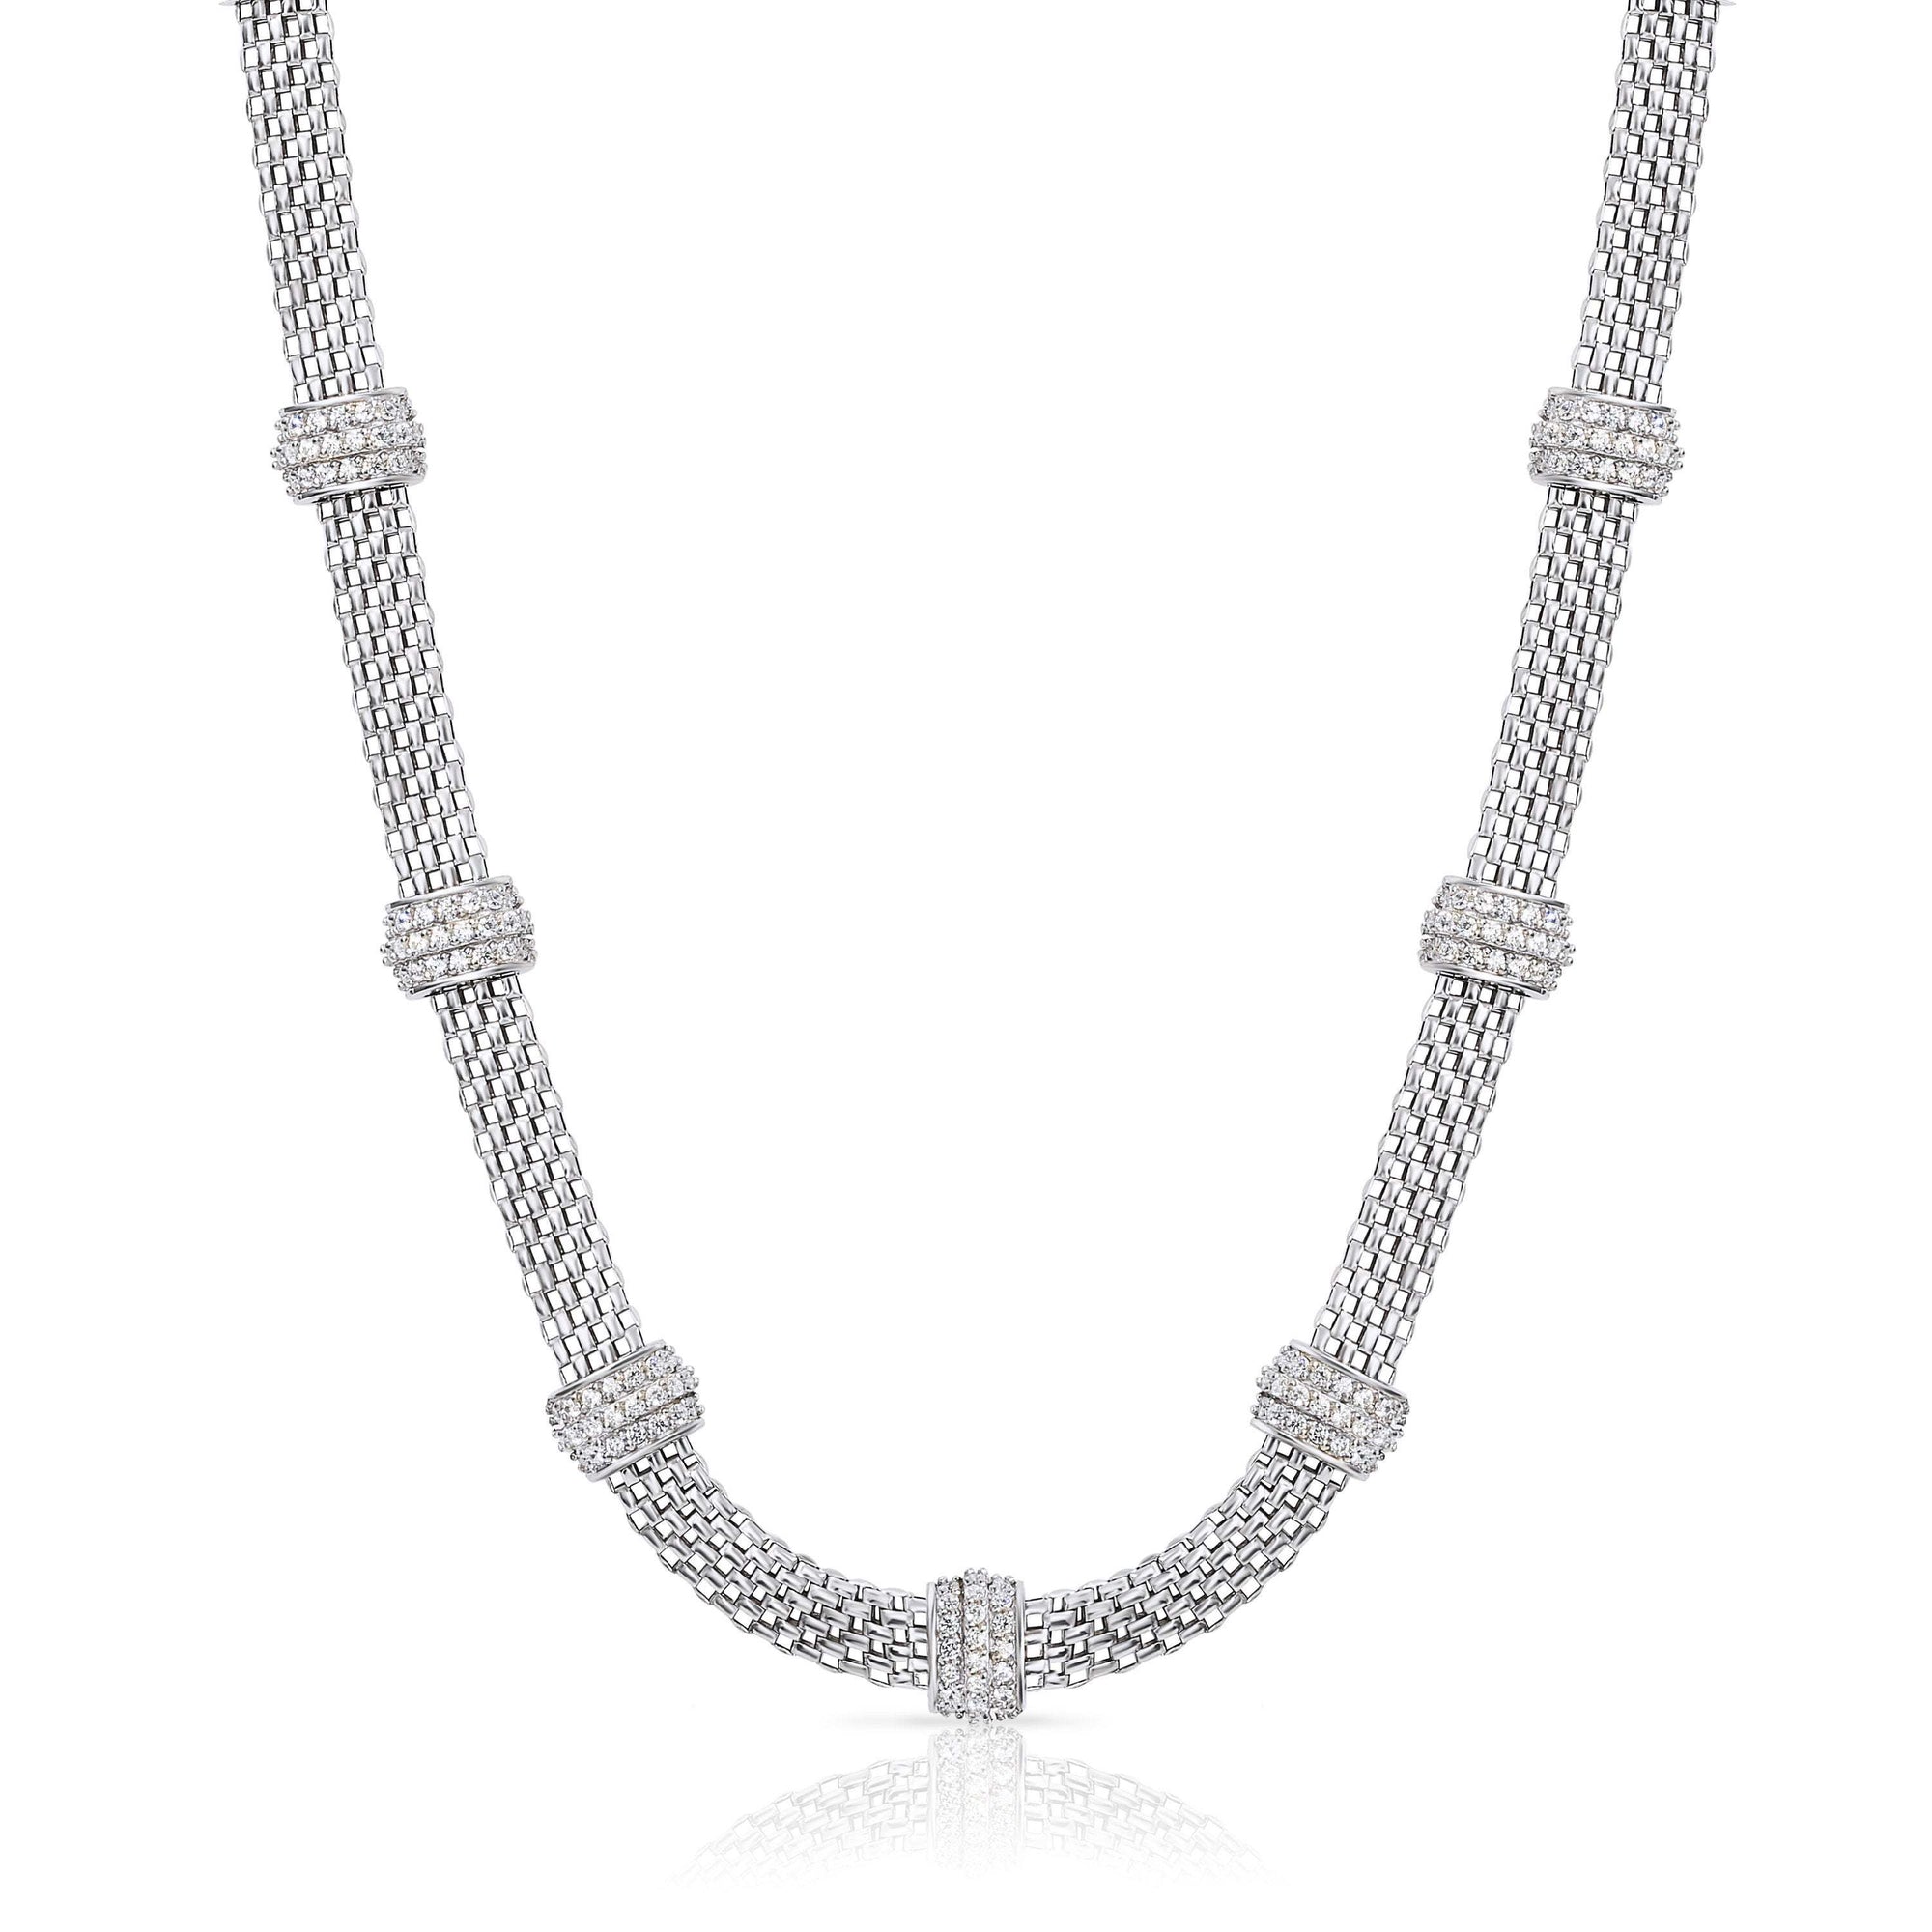 CZ Seven Station Necklace Italian Style in Sterling Silver